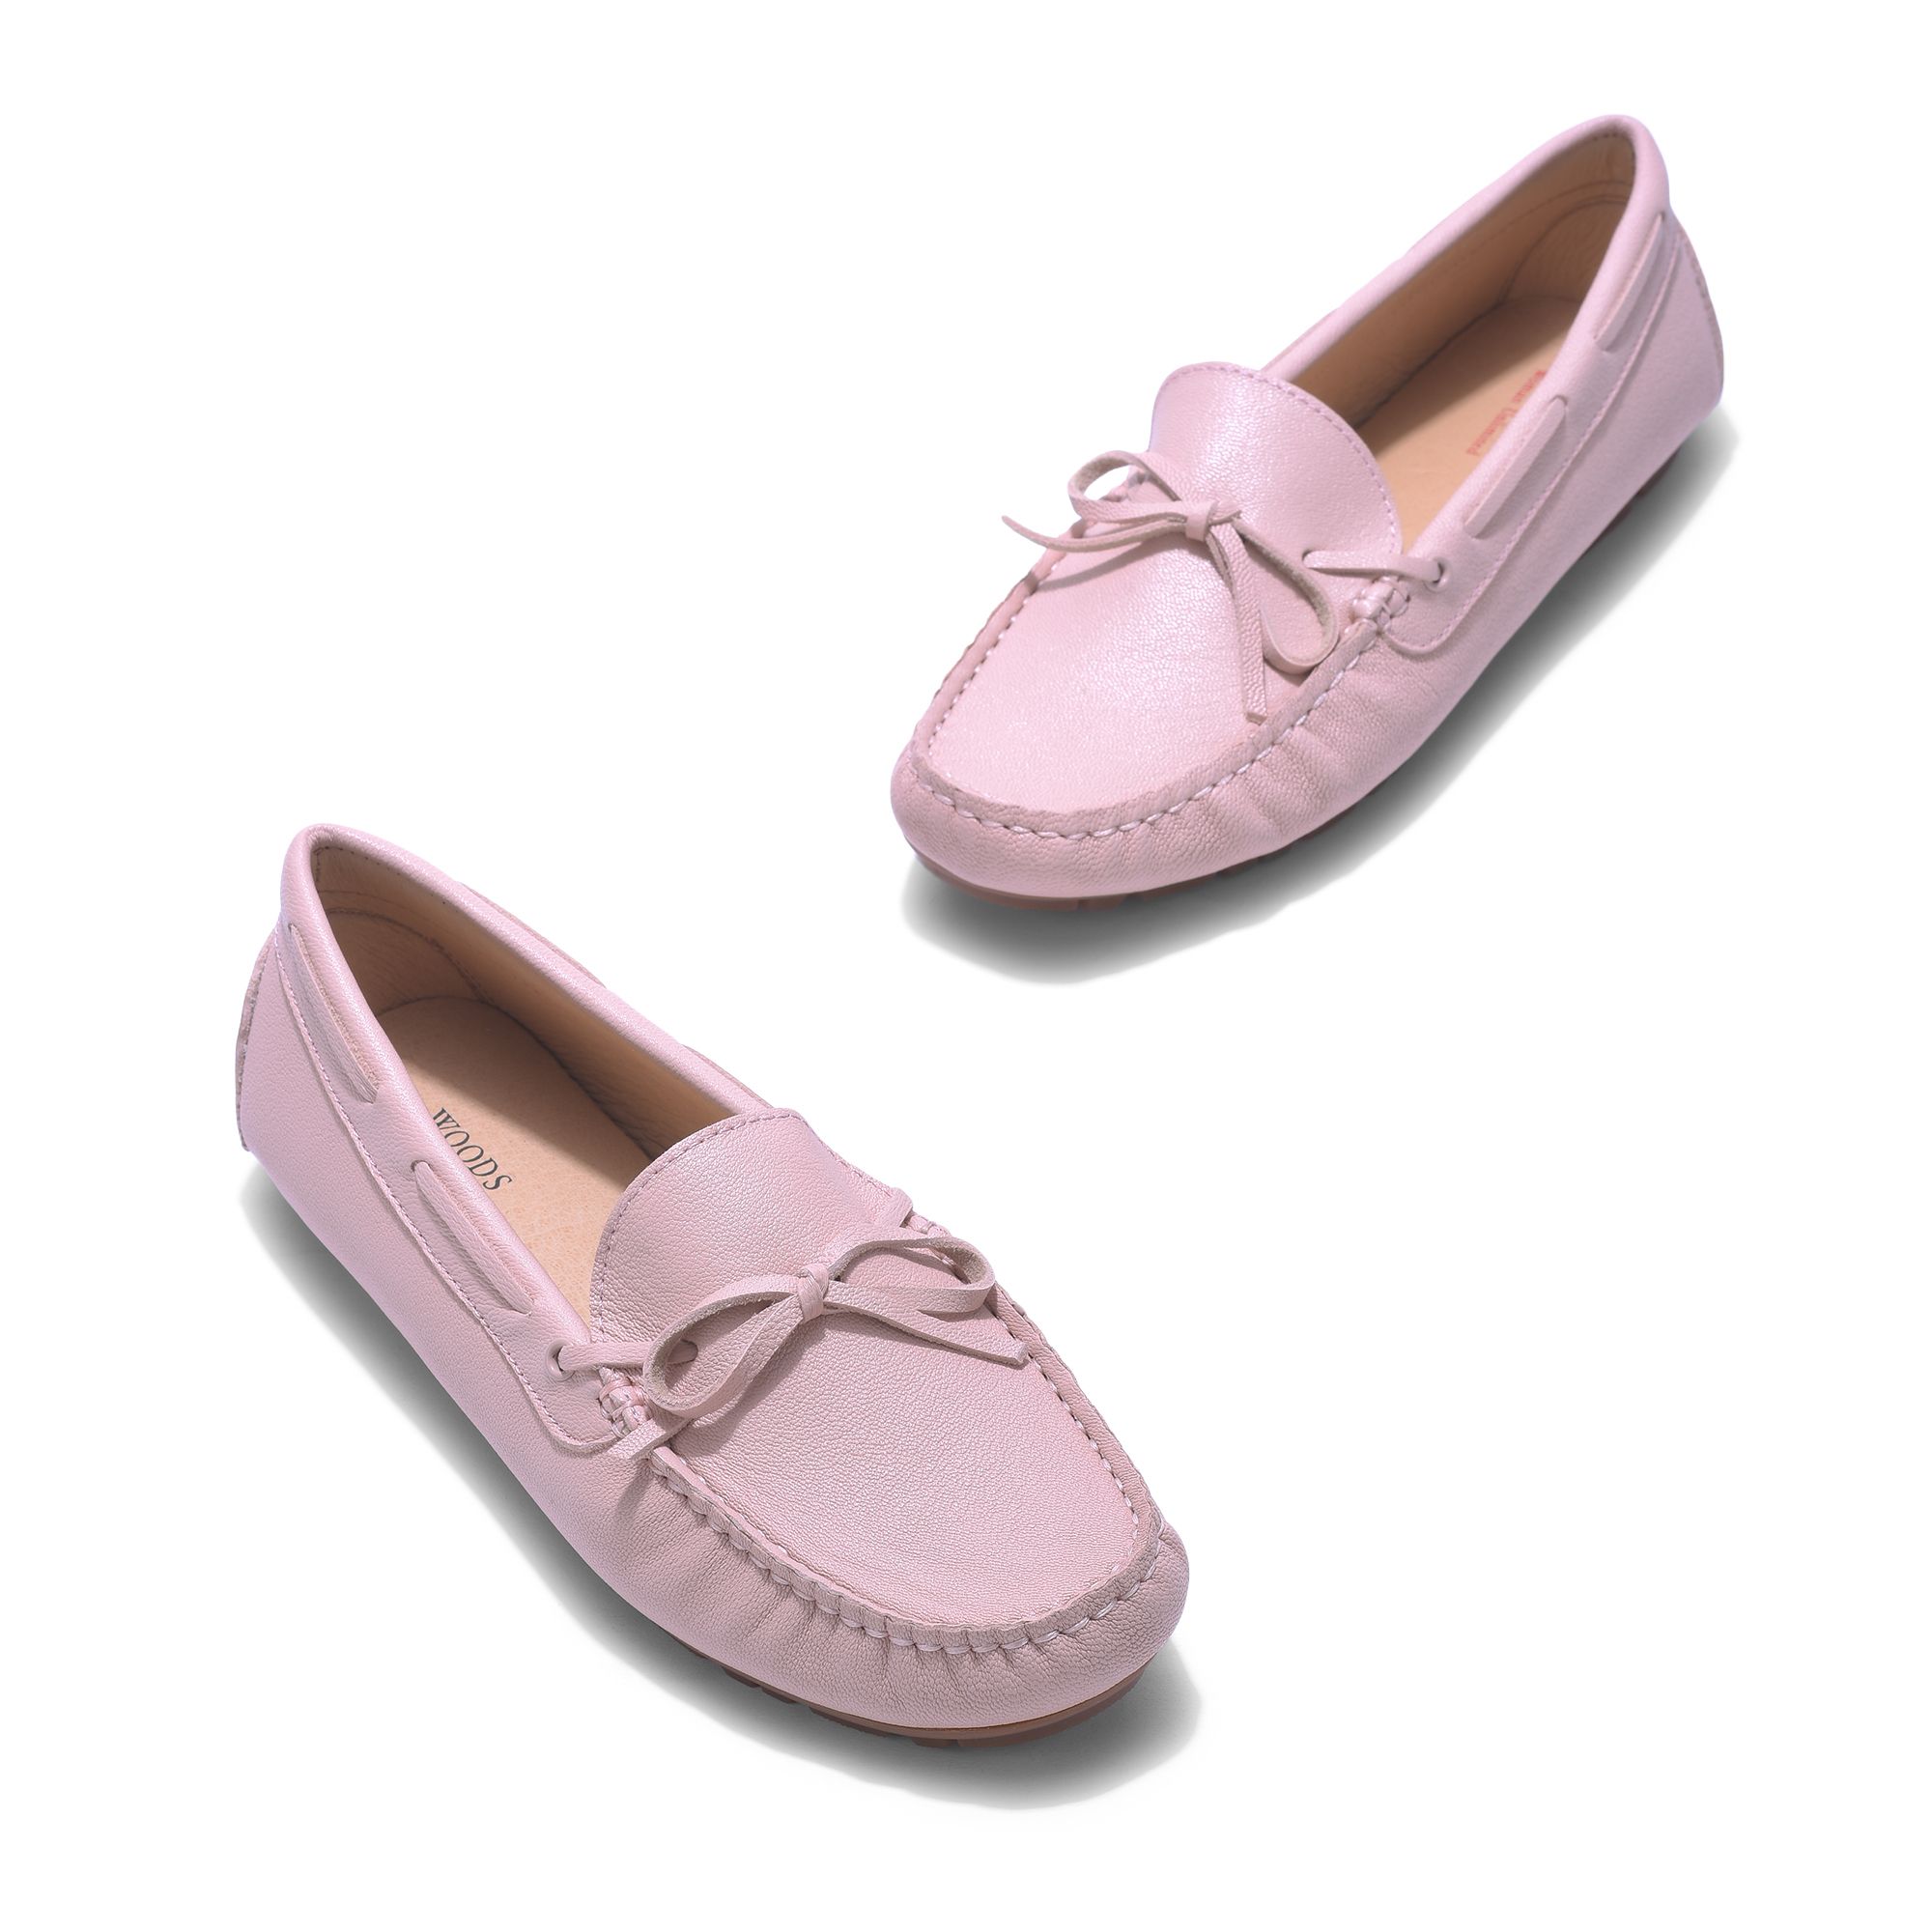 PINK moccasins for women